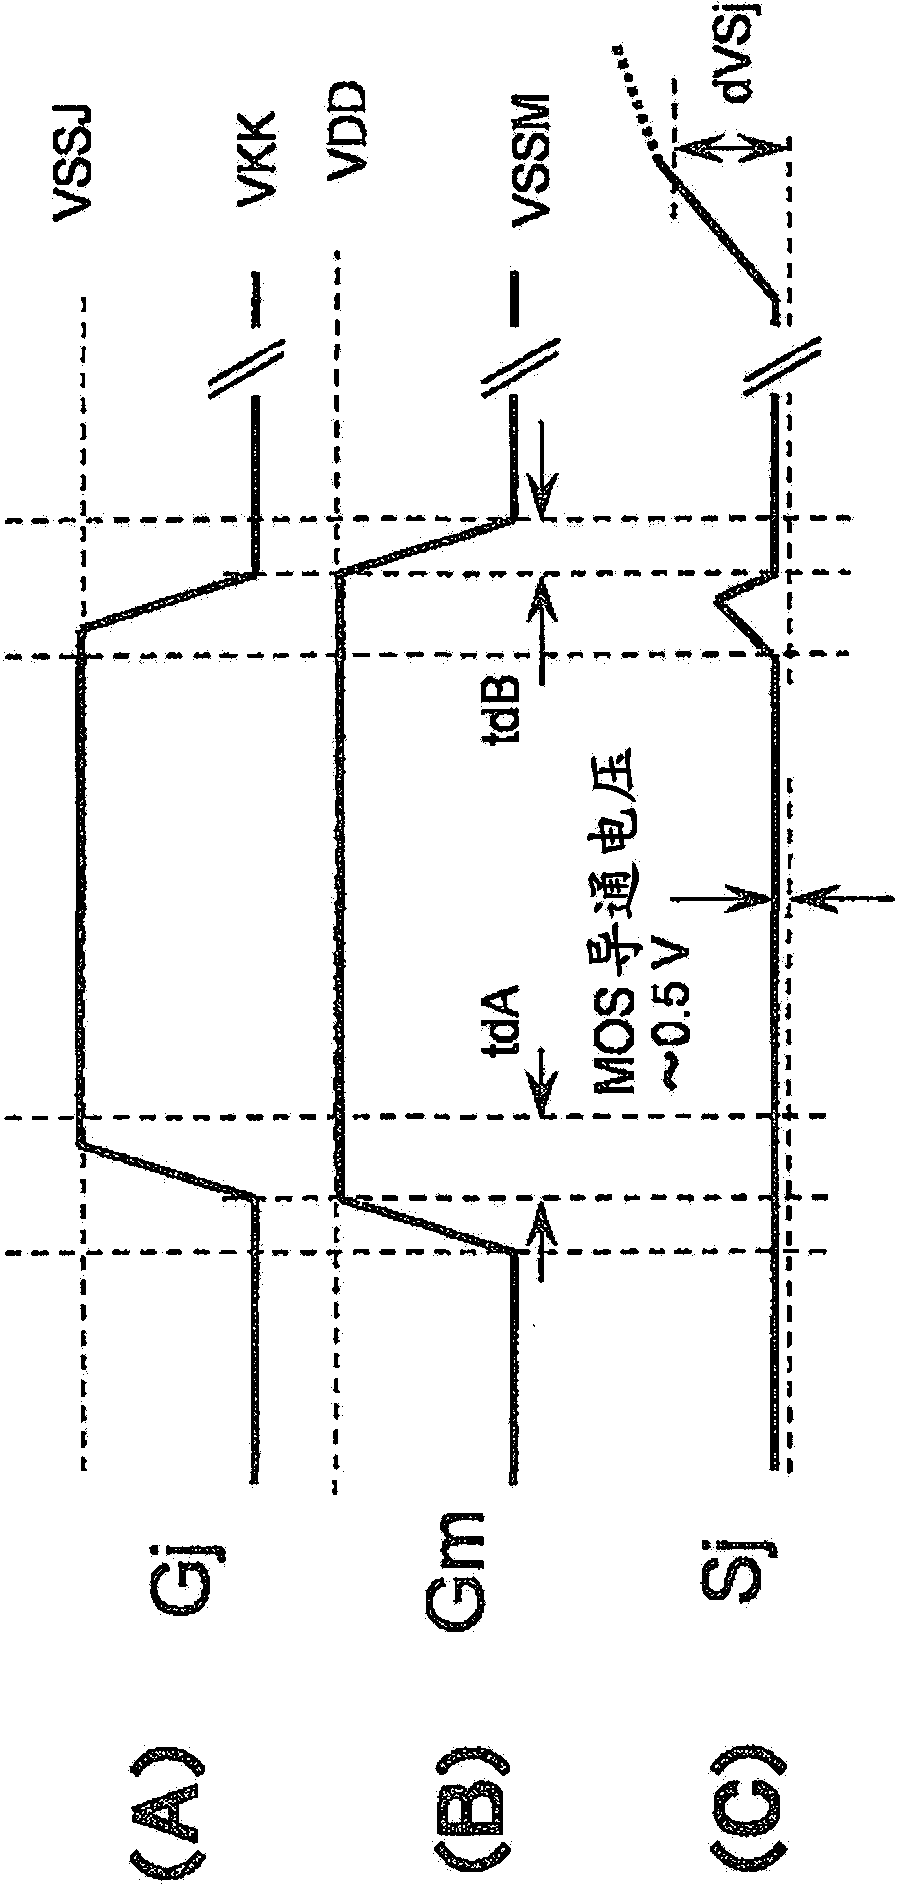 Semiconductor device and system using same